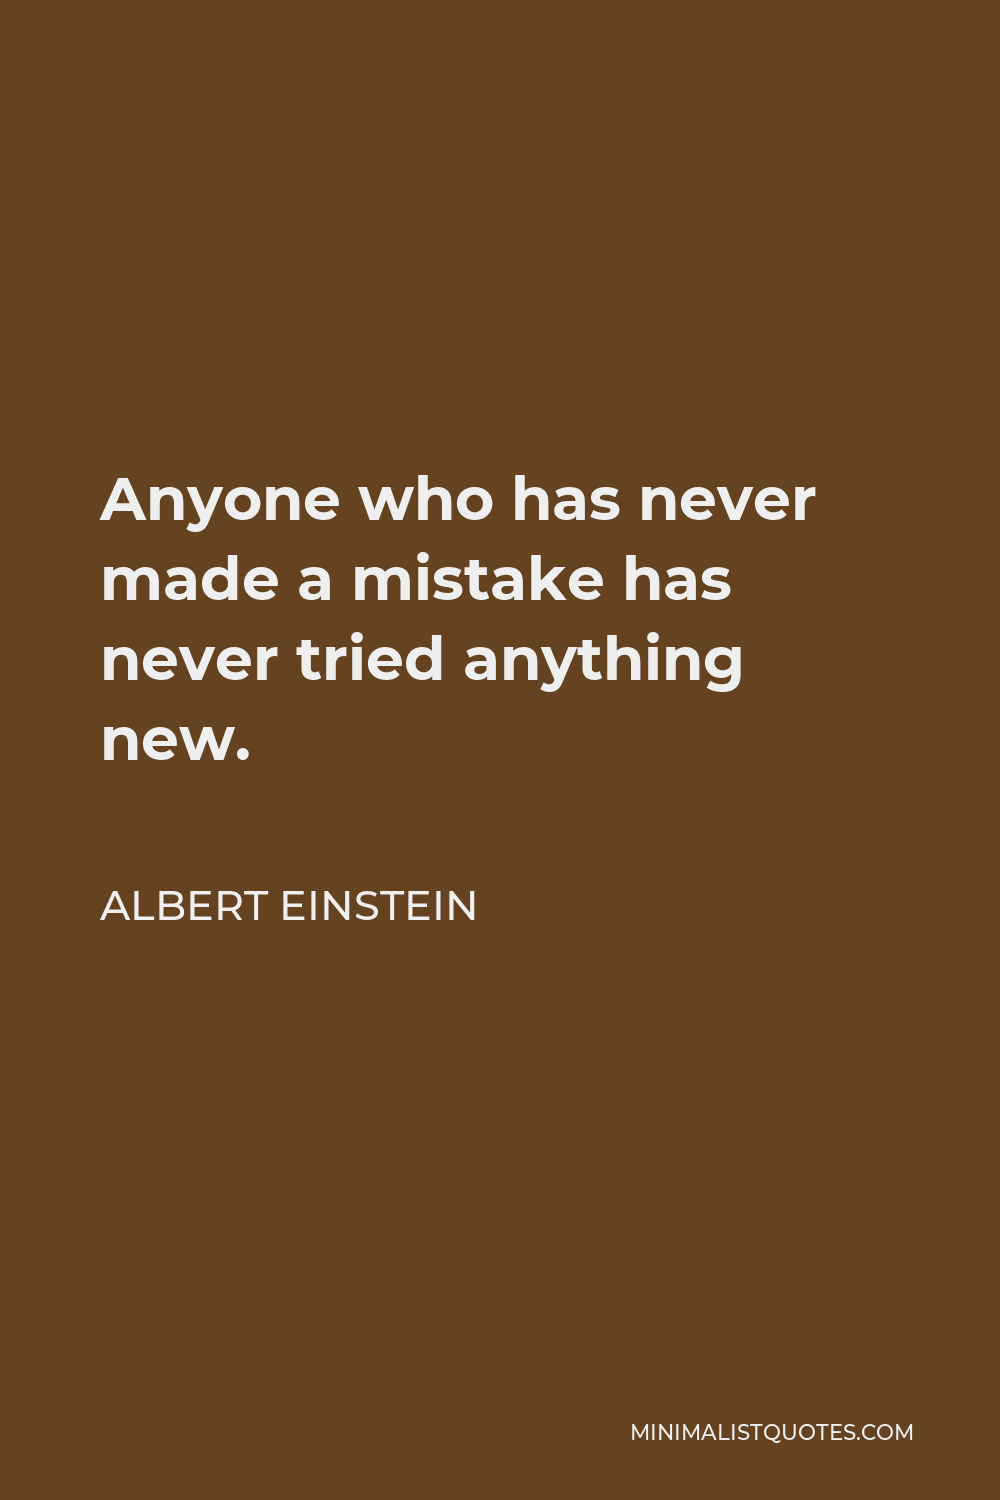 Albert Einstein Quote - Anyone who has never made a mistake has never tried anything new.